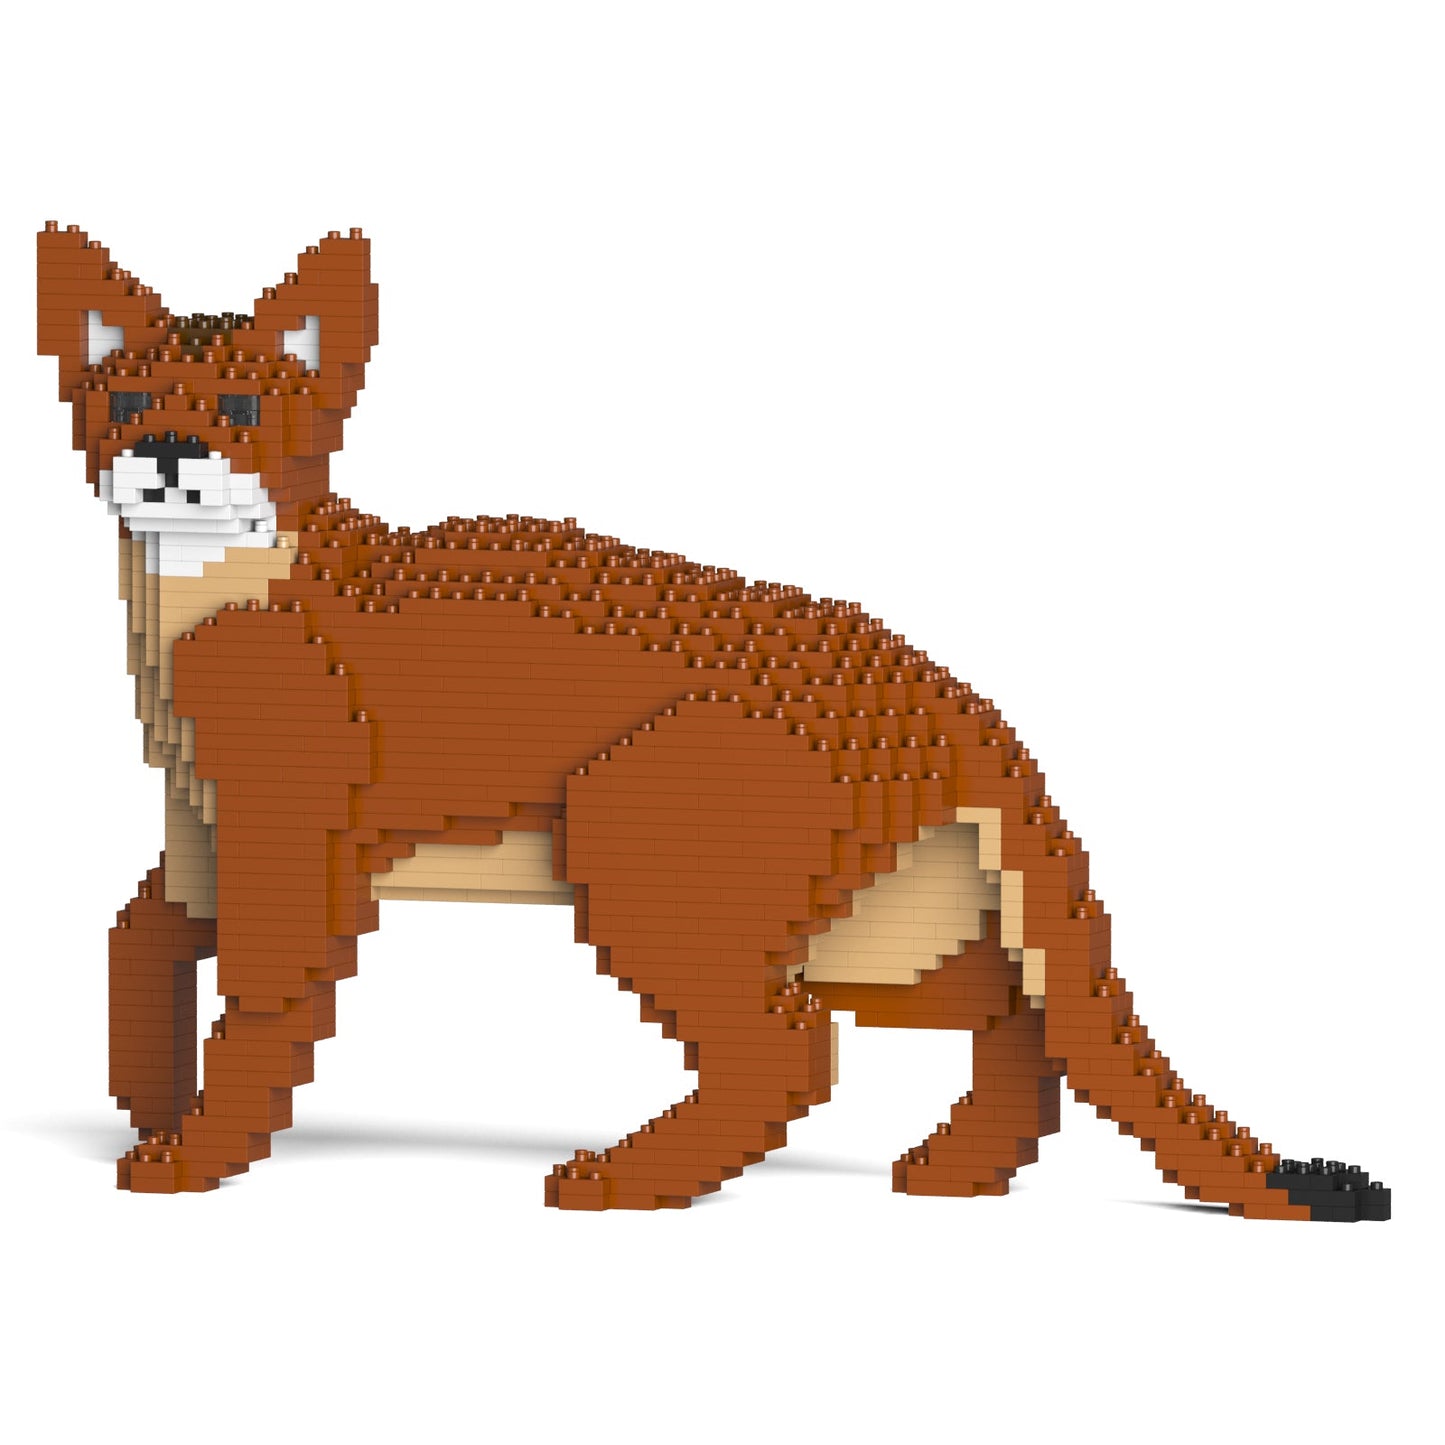 Abyssinian Cat 01S